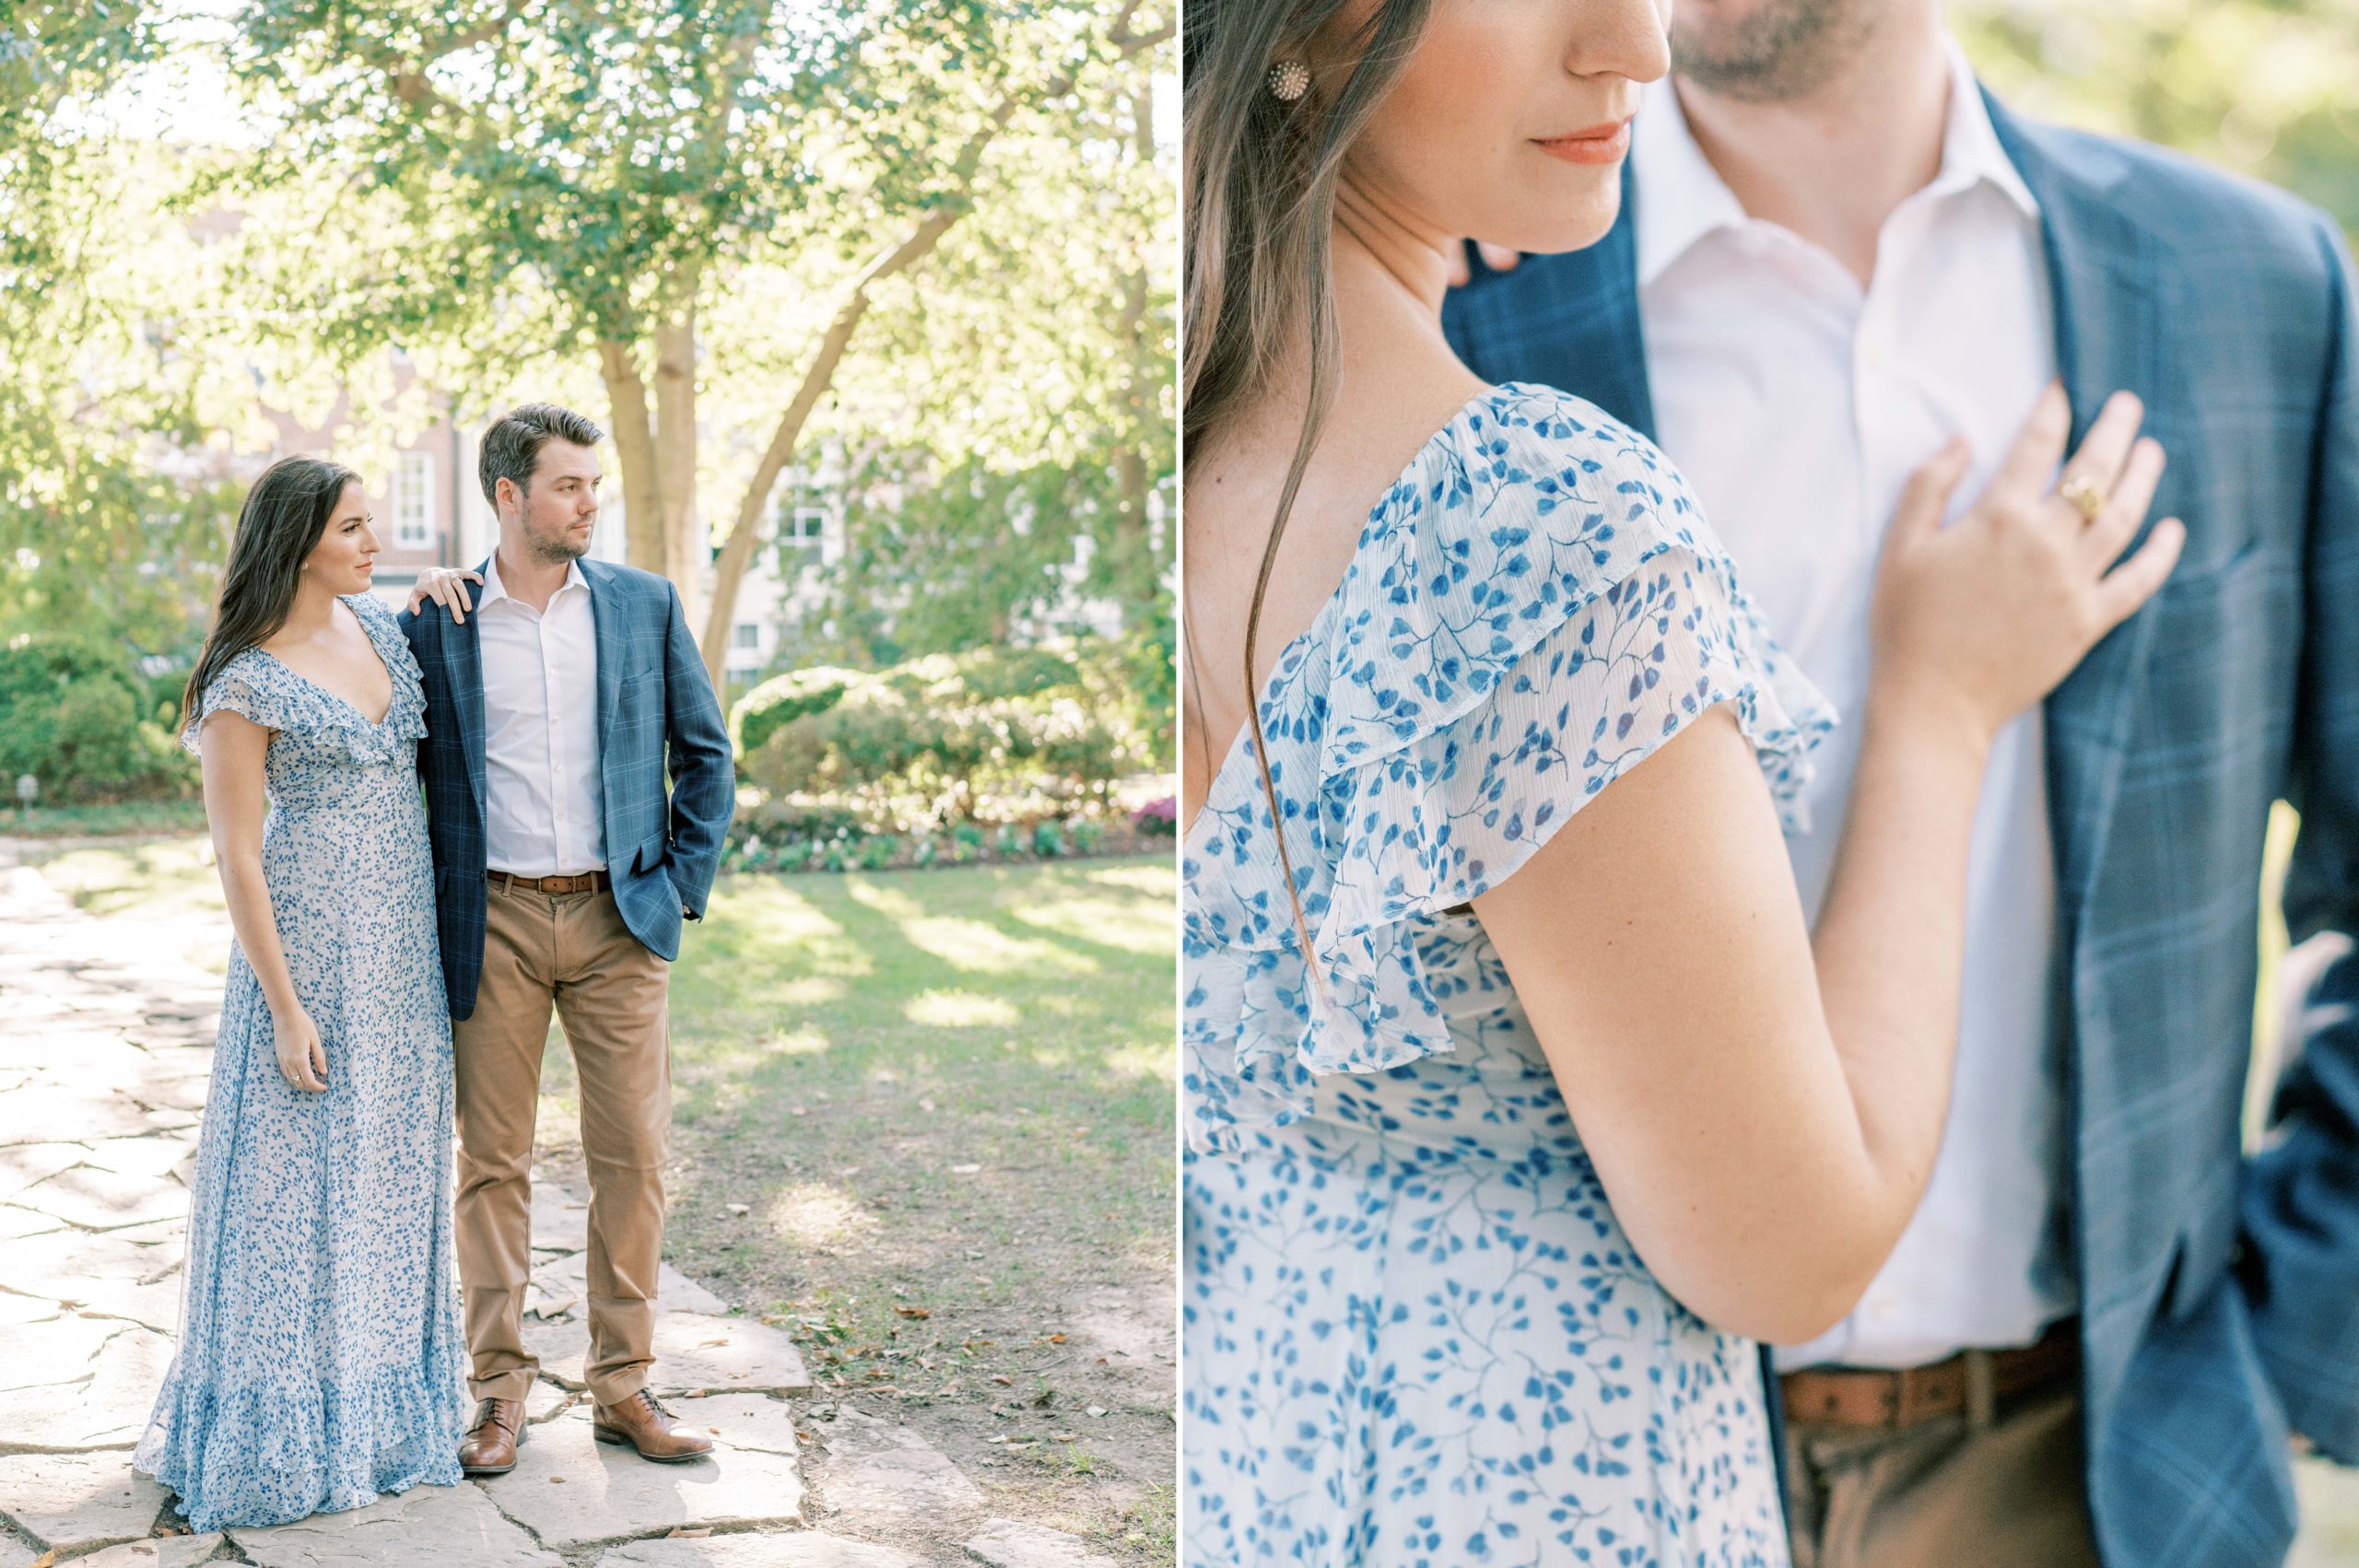 A stunning engagement session at the Meridian House in downtown Washington, DC. Captured by DC film photographer, Alicia Lacey.